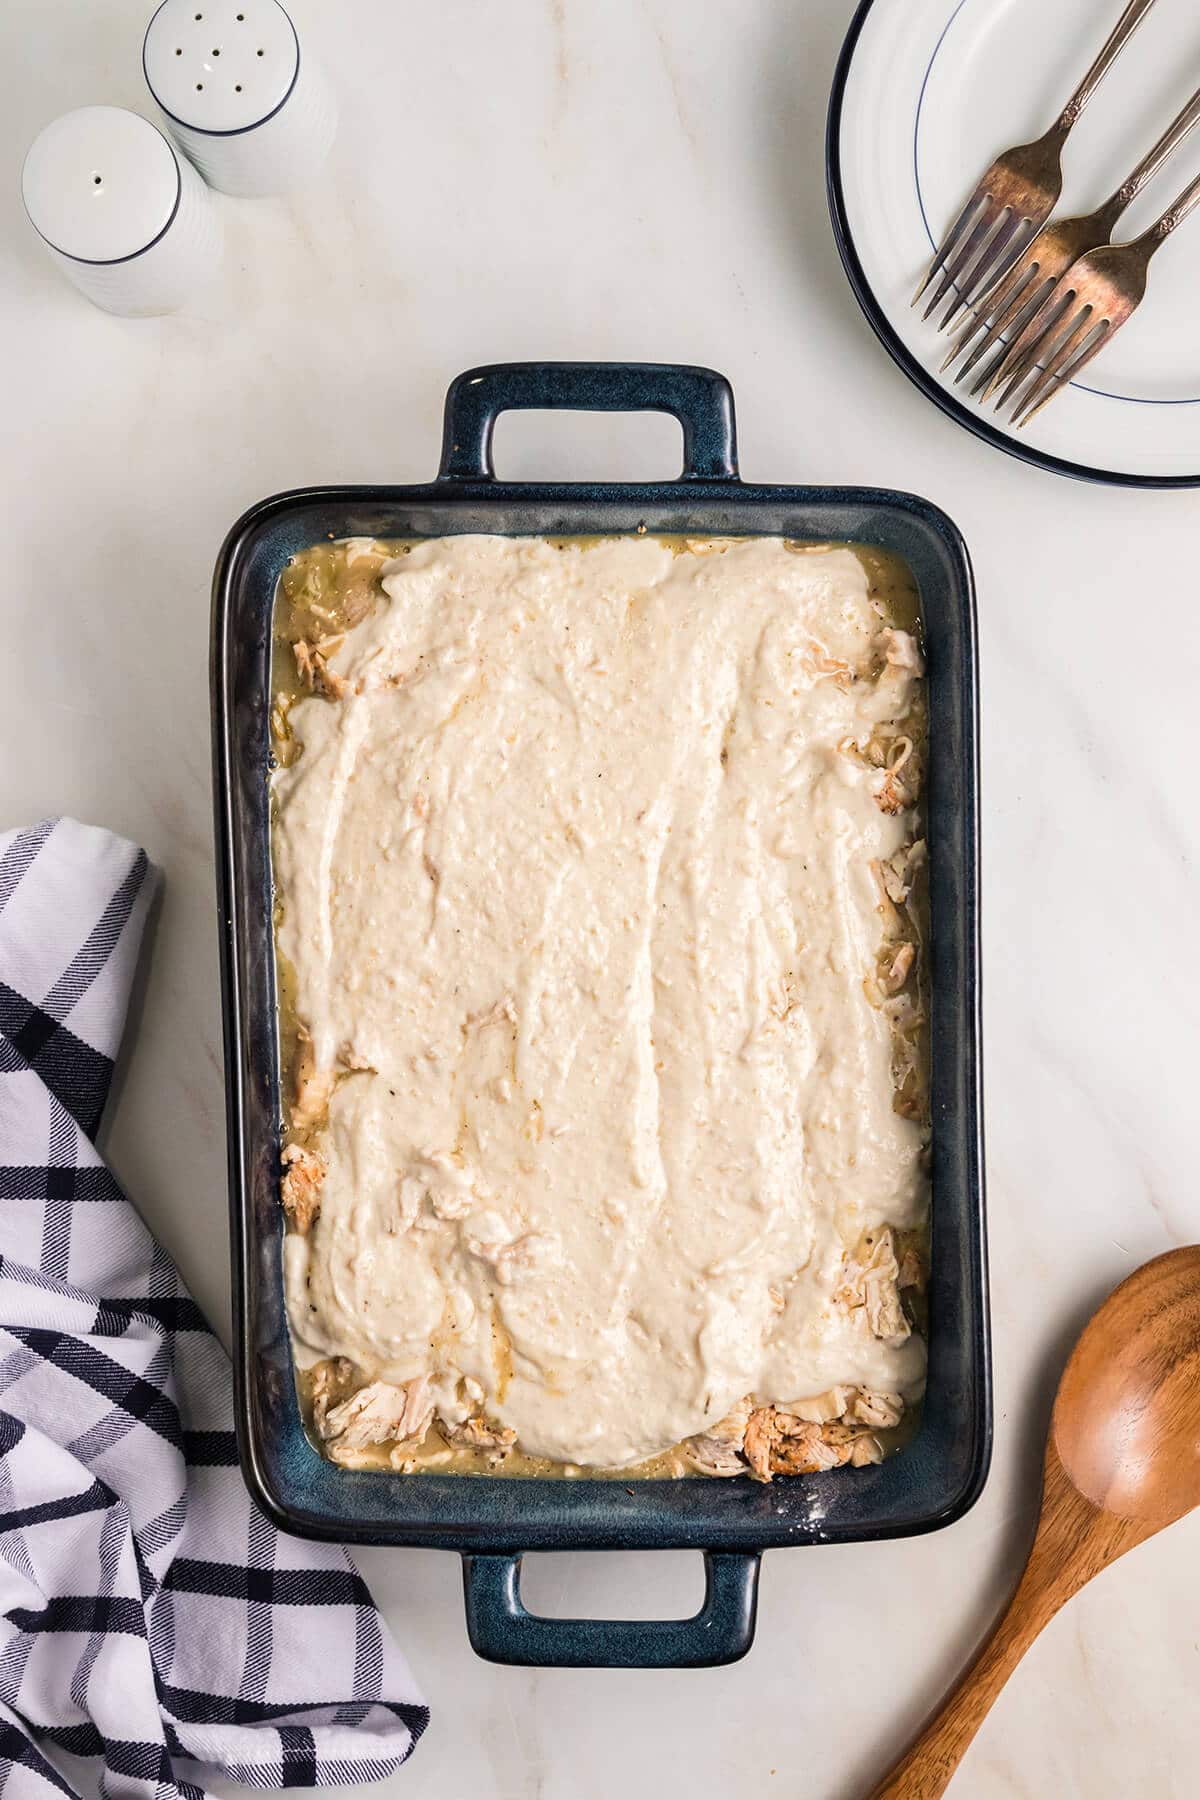 Shredded chicken covered with cream of celery soup in a baking dish with a wooden spoon on the side.